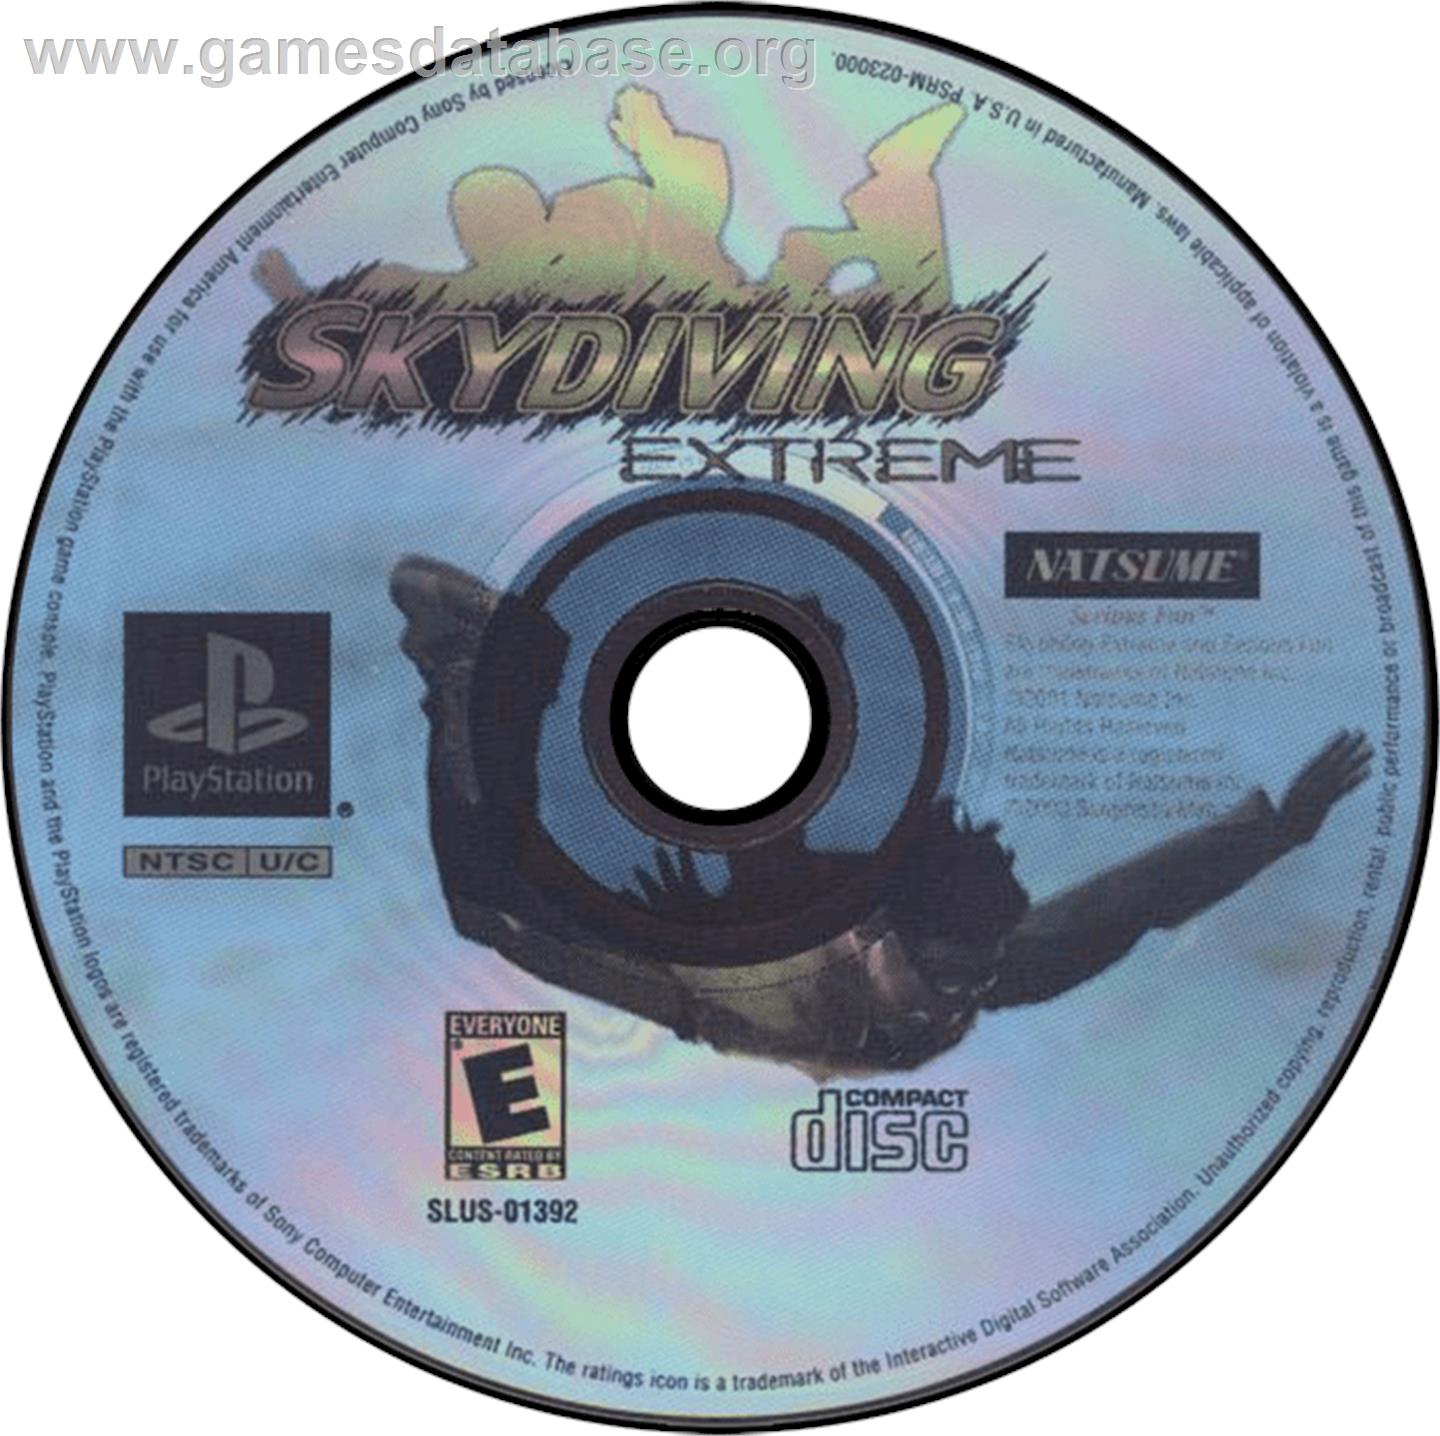 Skydiving Extreme - Sony Playstation - Artwork - Disc